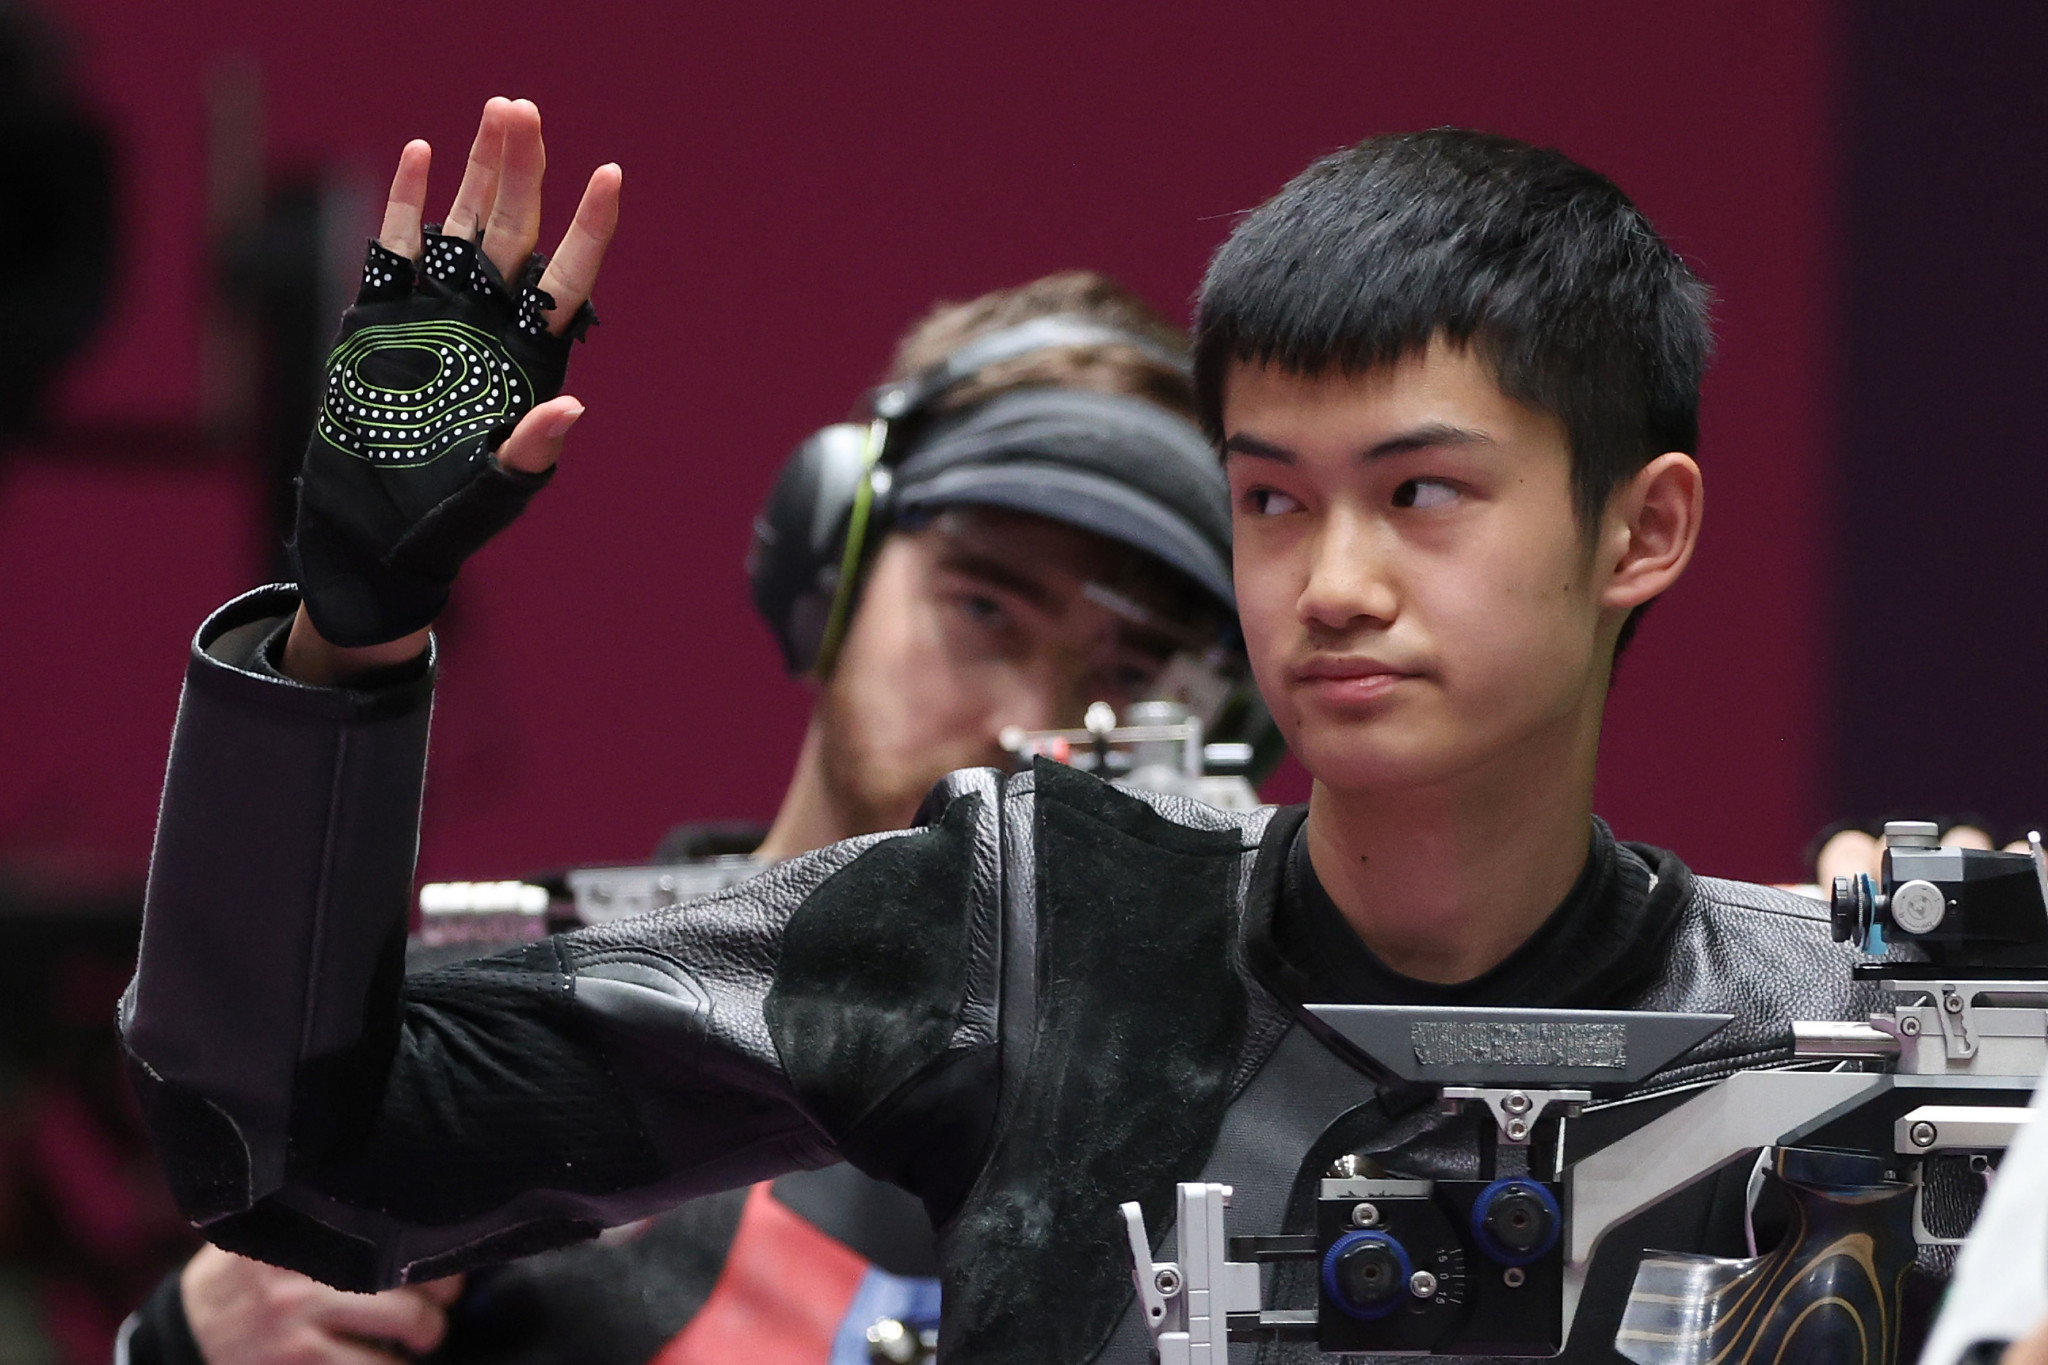 China's Olympic silver medallist Sheng Lihao earned gold in the men's and mixed team 10m air rifle at the ISSF World Cup in Bhopal ©Getty Images